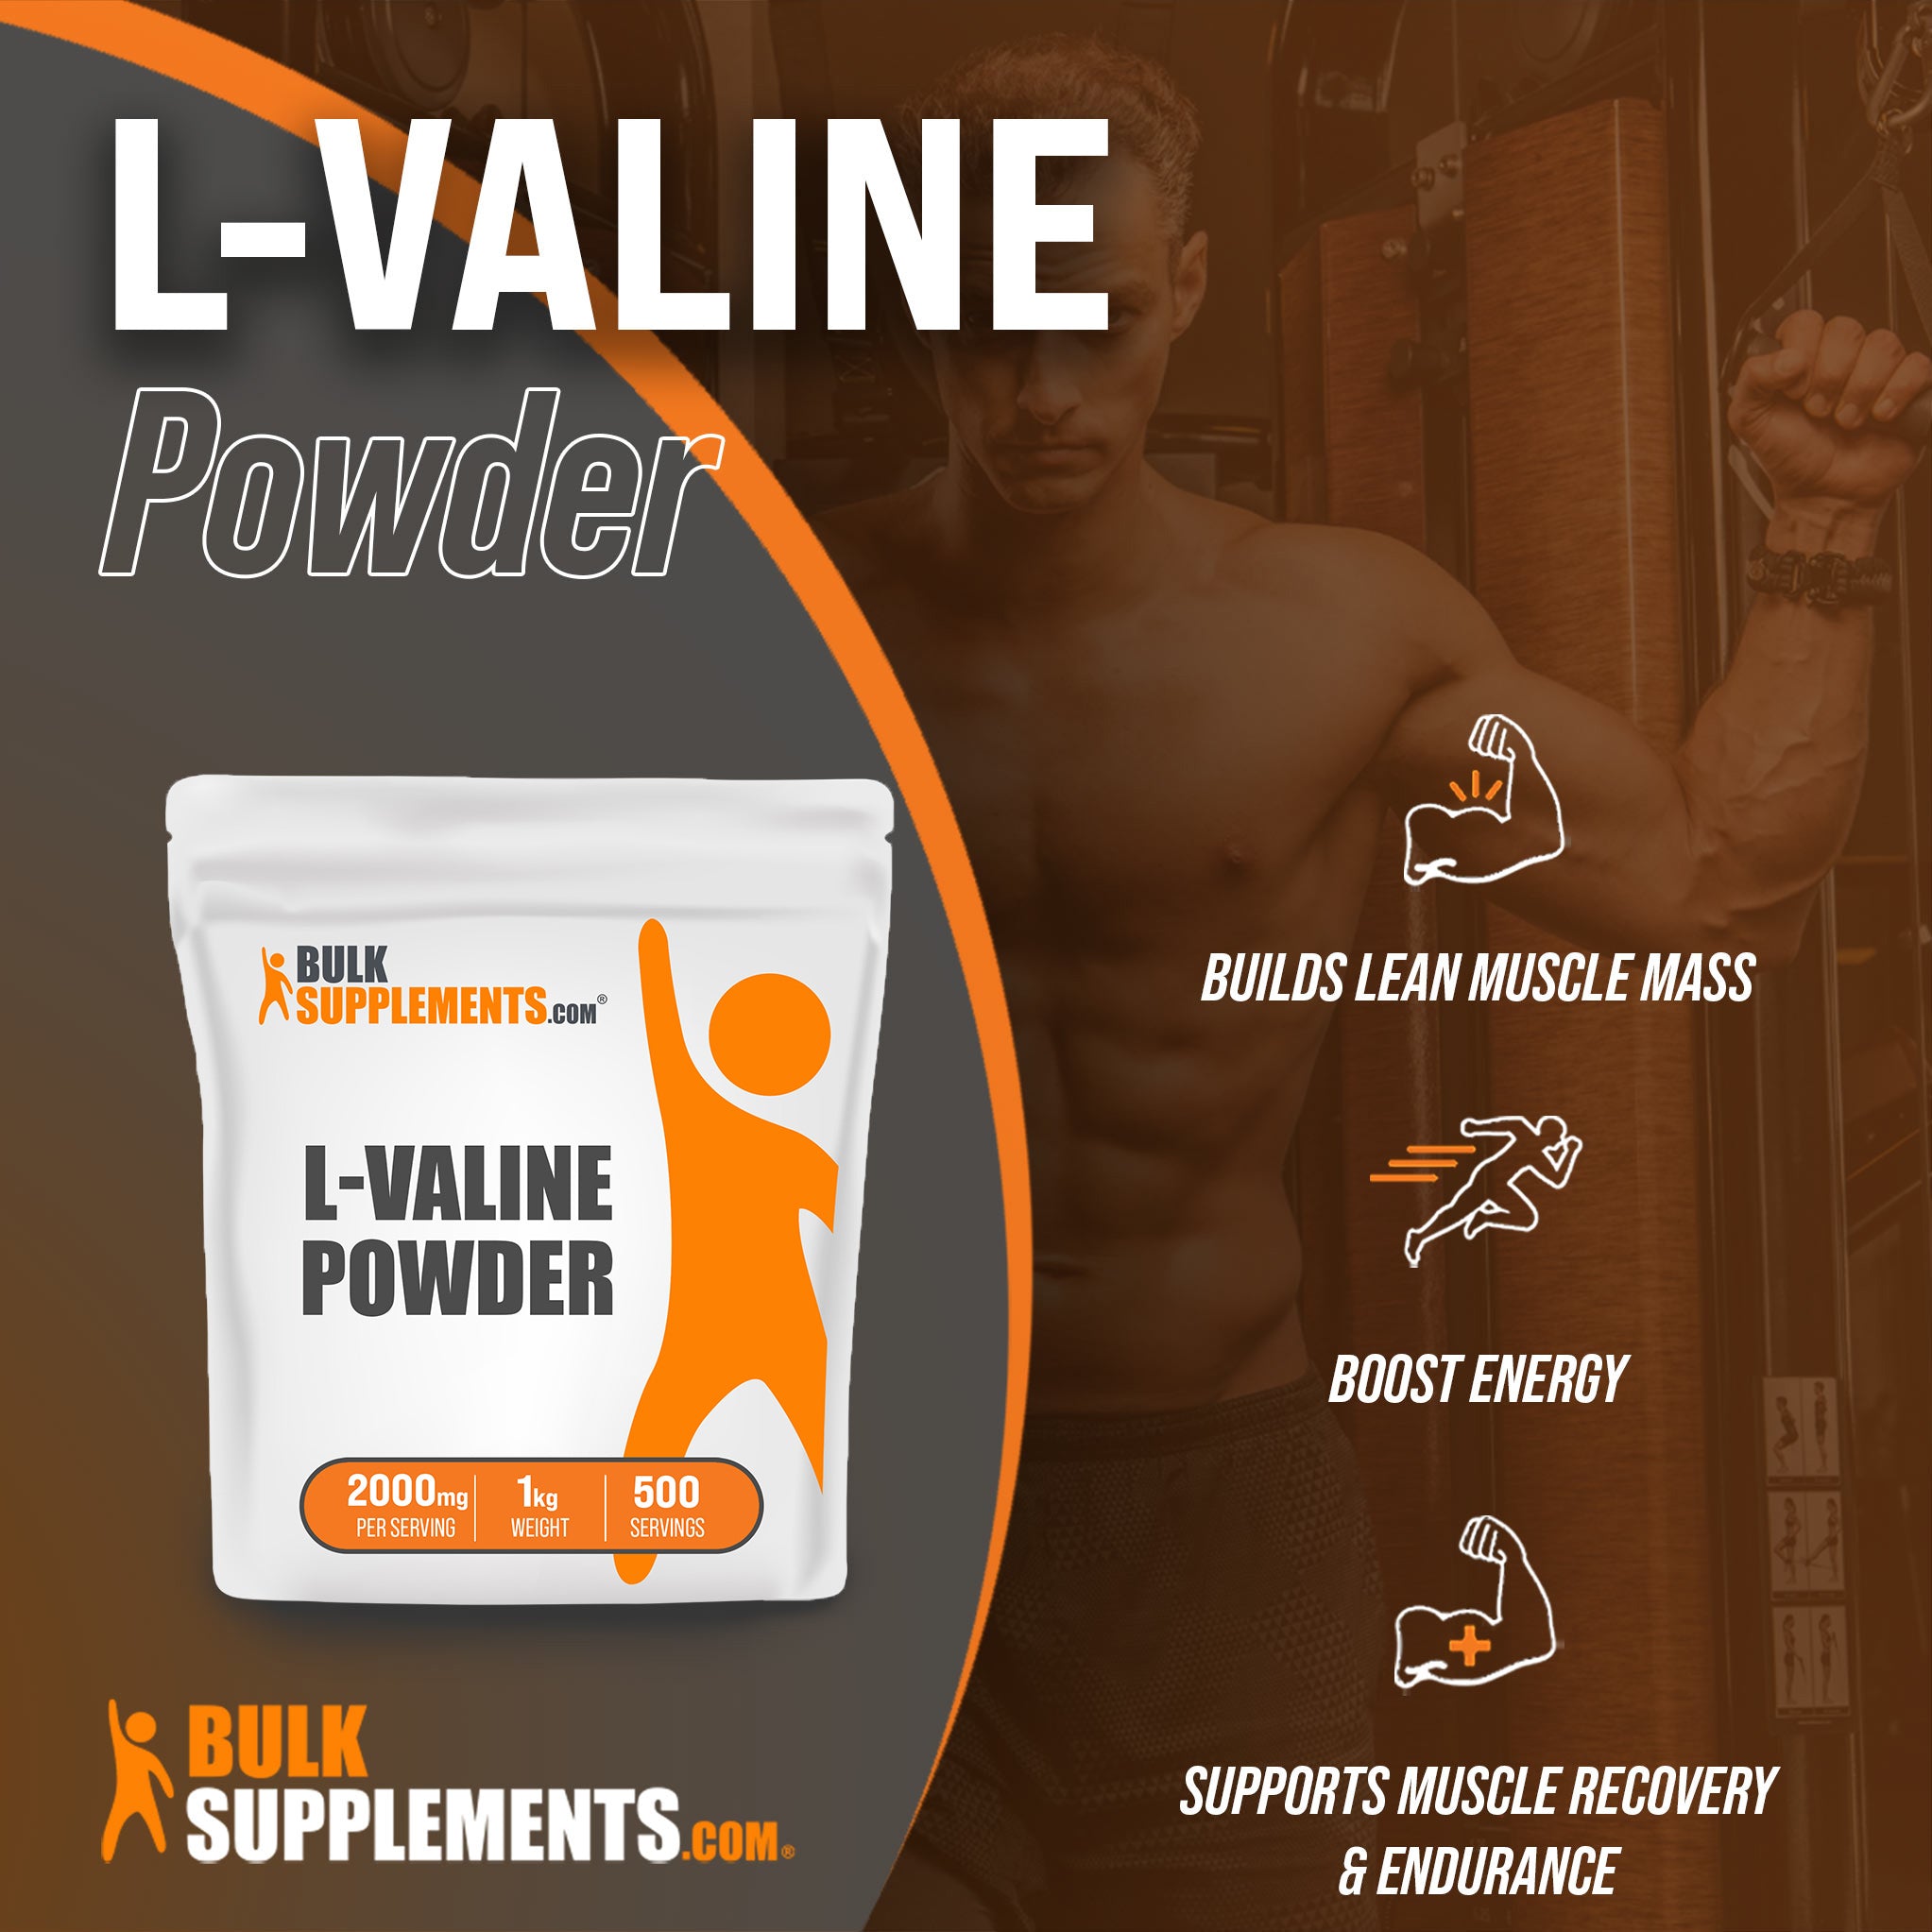 Benefits of L-Valine: builds lean muscle mass, boost energy, supports muscle recovery and endurance